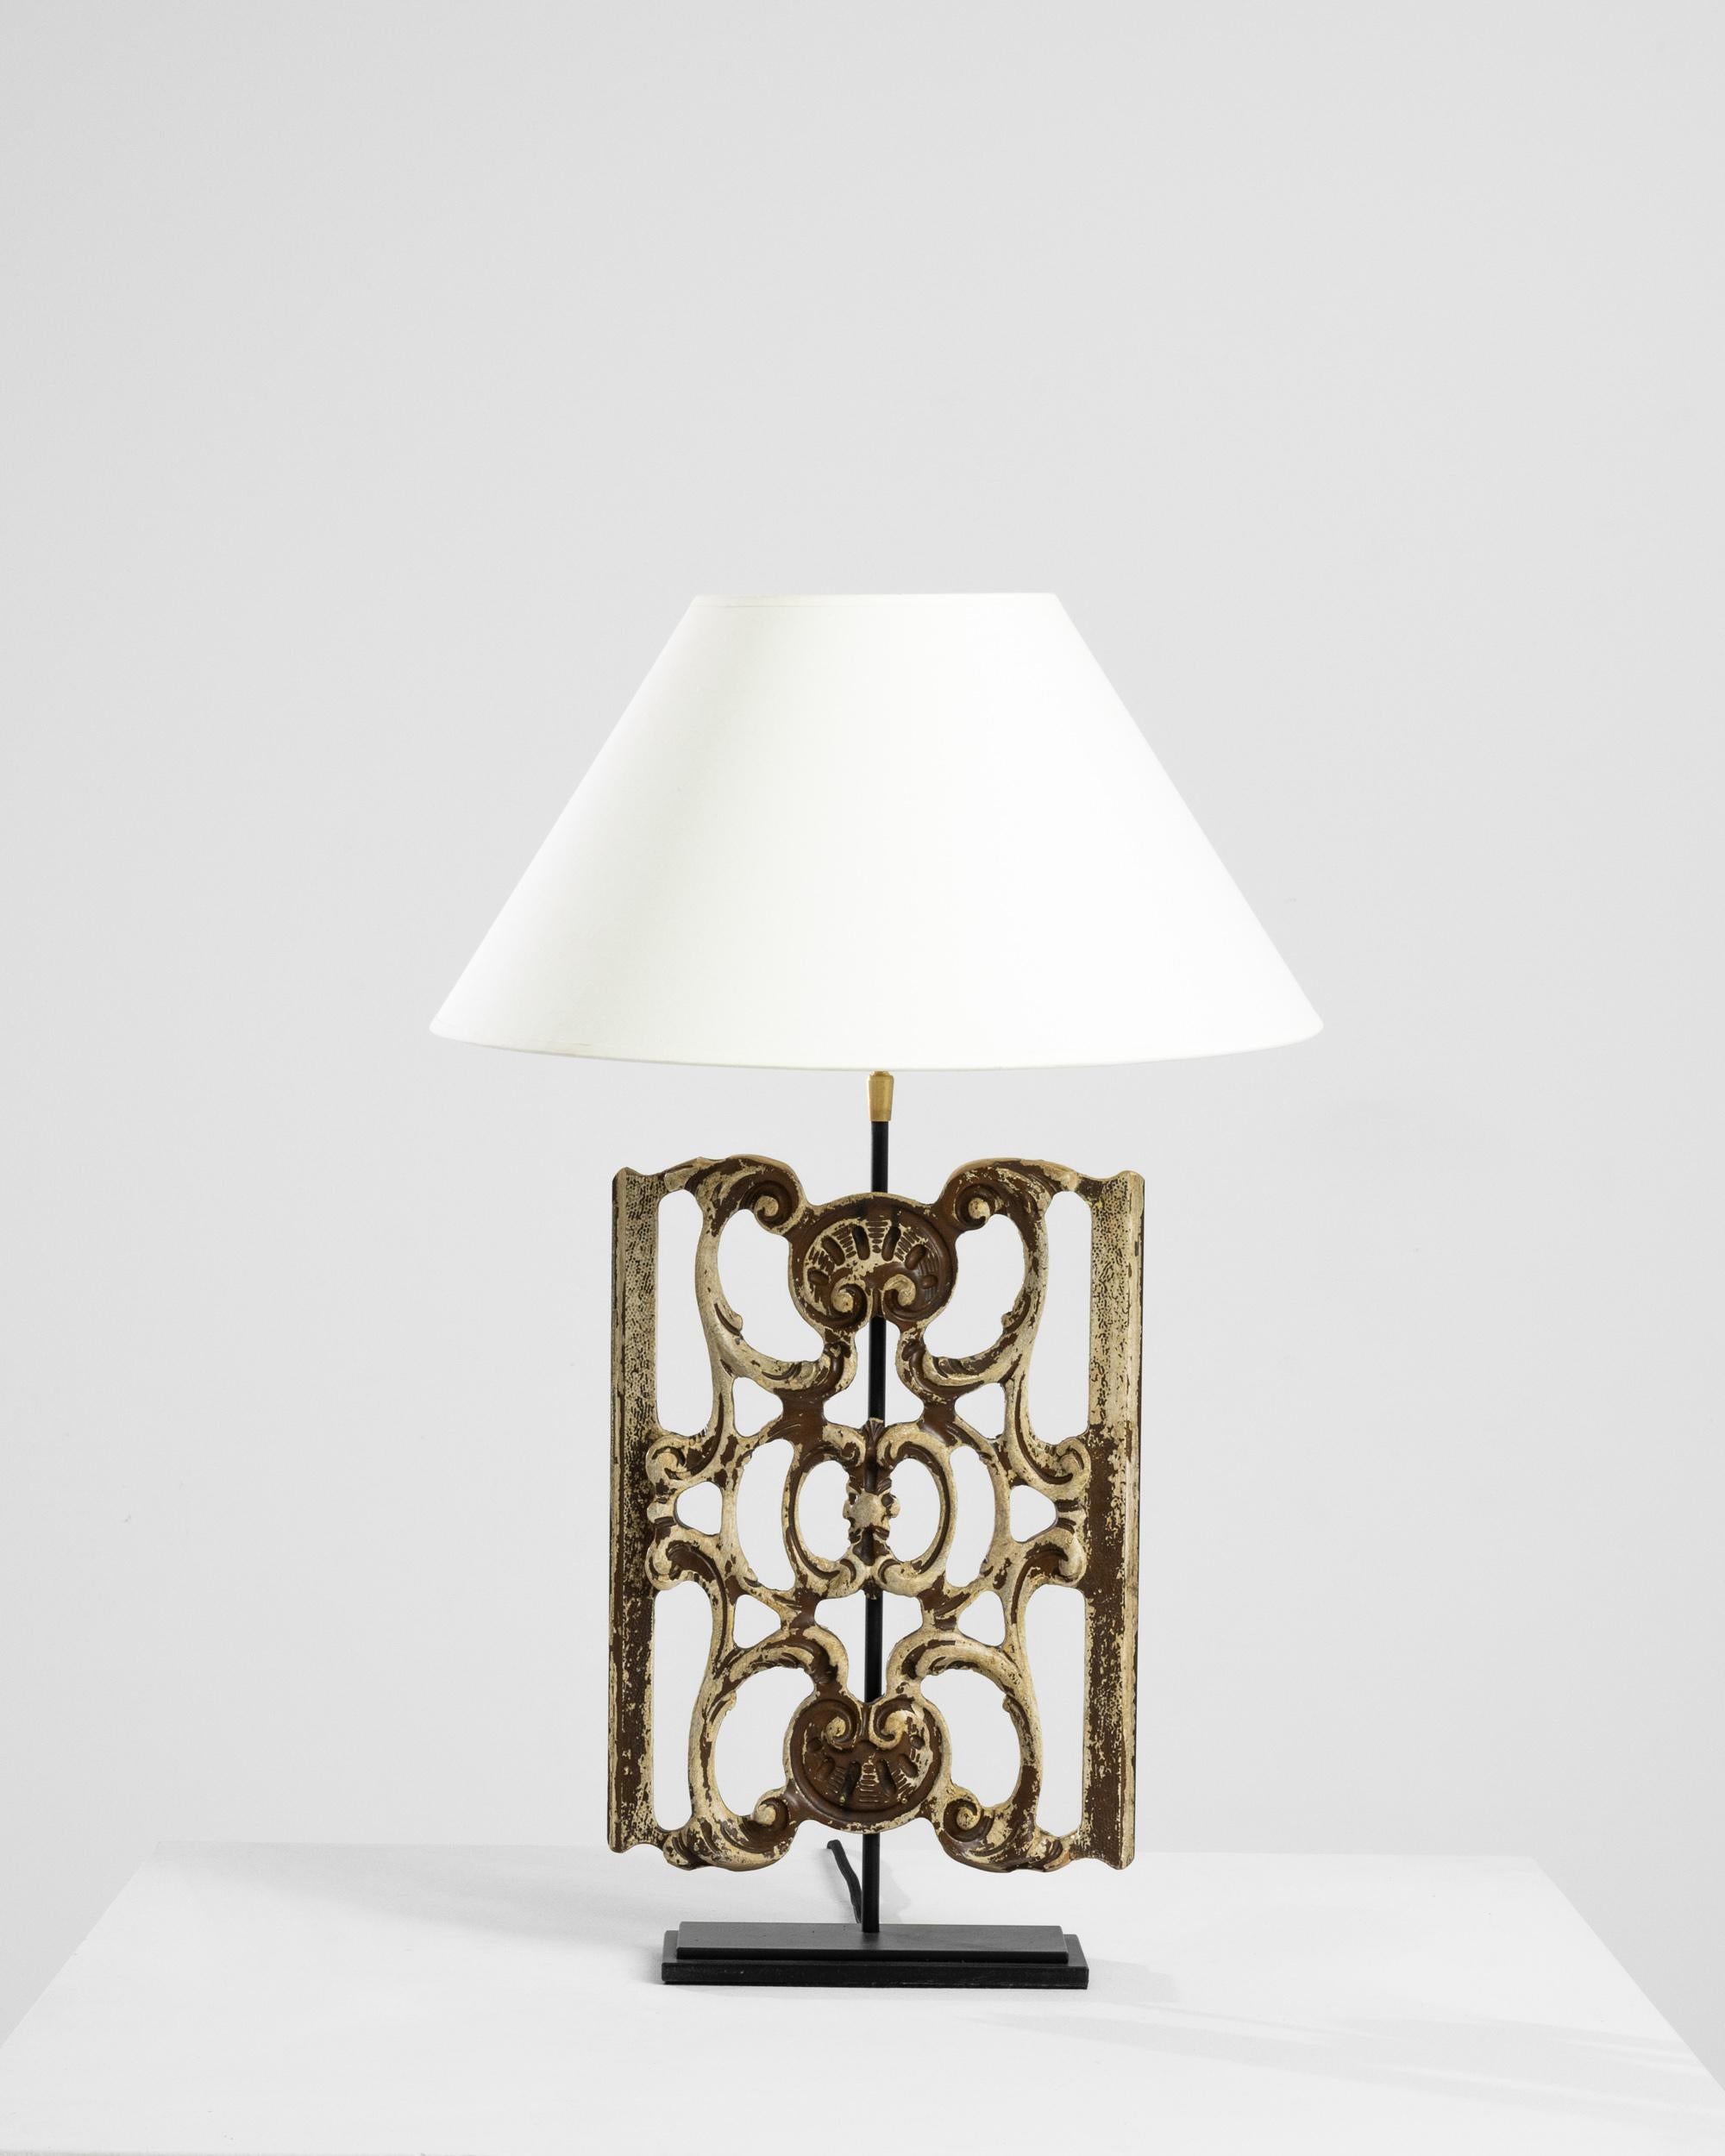 Made from a piece of reclaimed wooden ornament, this table lamp makes a truly unique accent. The base was originally carved in turn of the century France, and most likely formed part of an architectural composition. When the lamp is illuminated, the